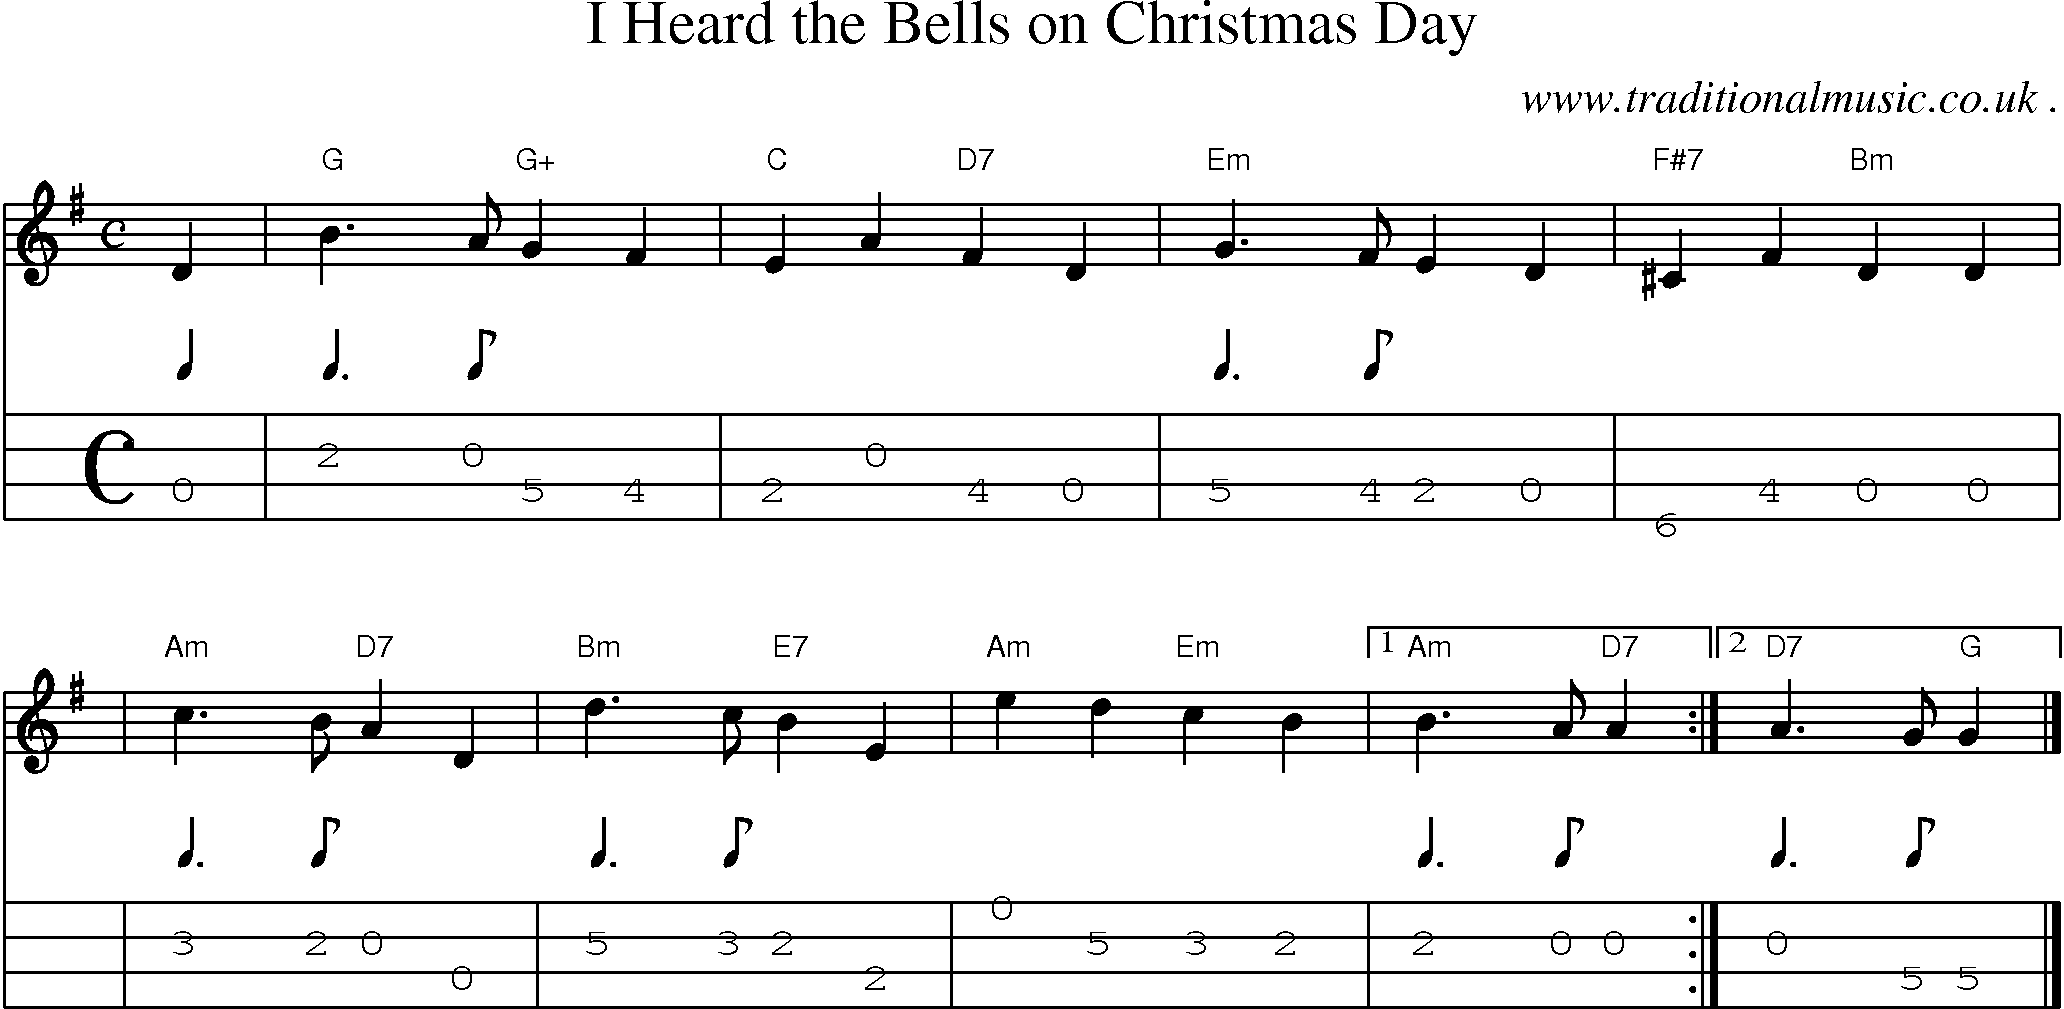 Sheet-music  score, Chords and Mandolin Tabs for I Heard The Bells On Christmas Day